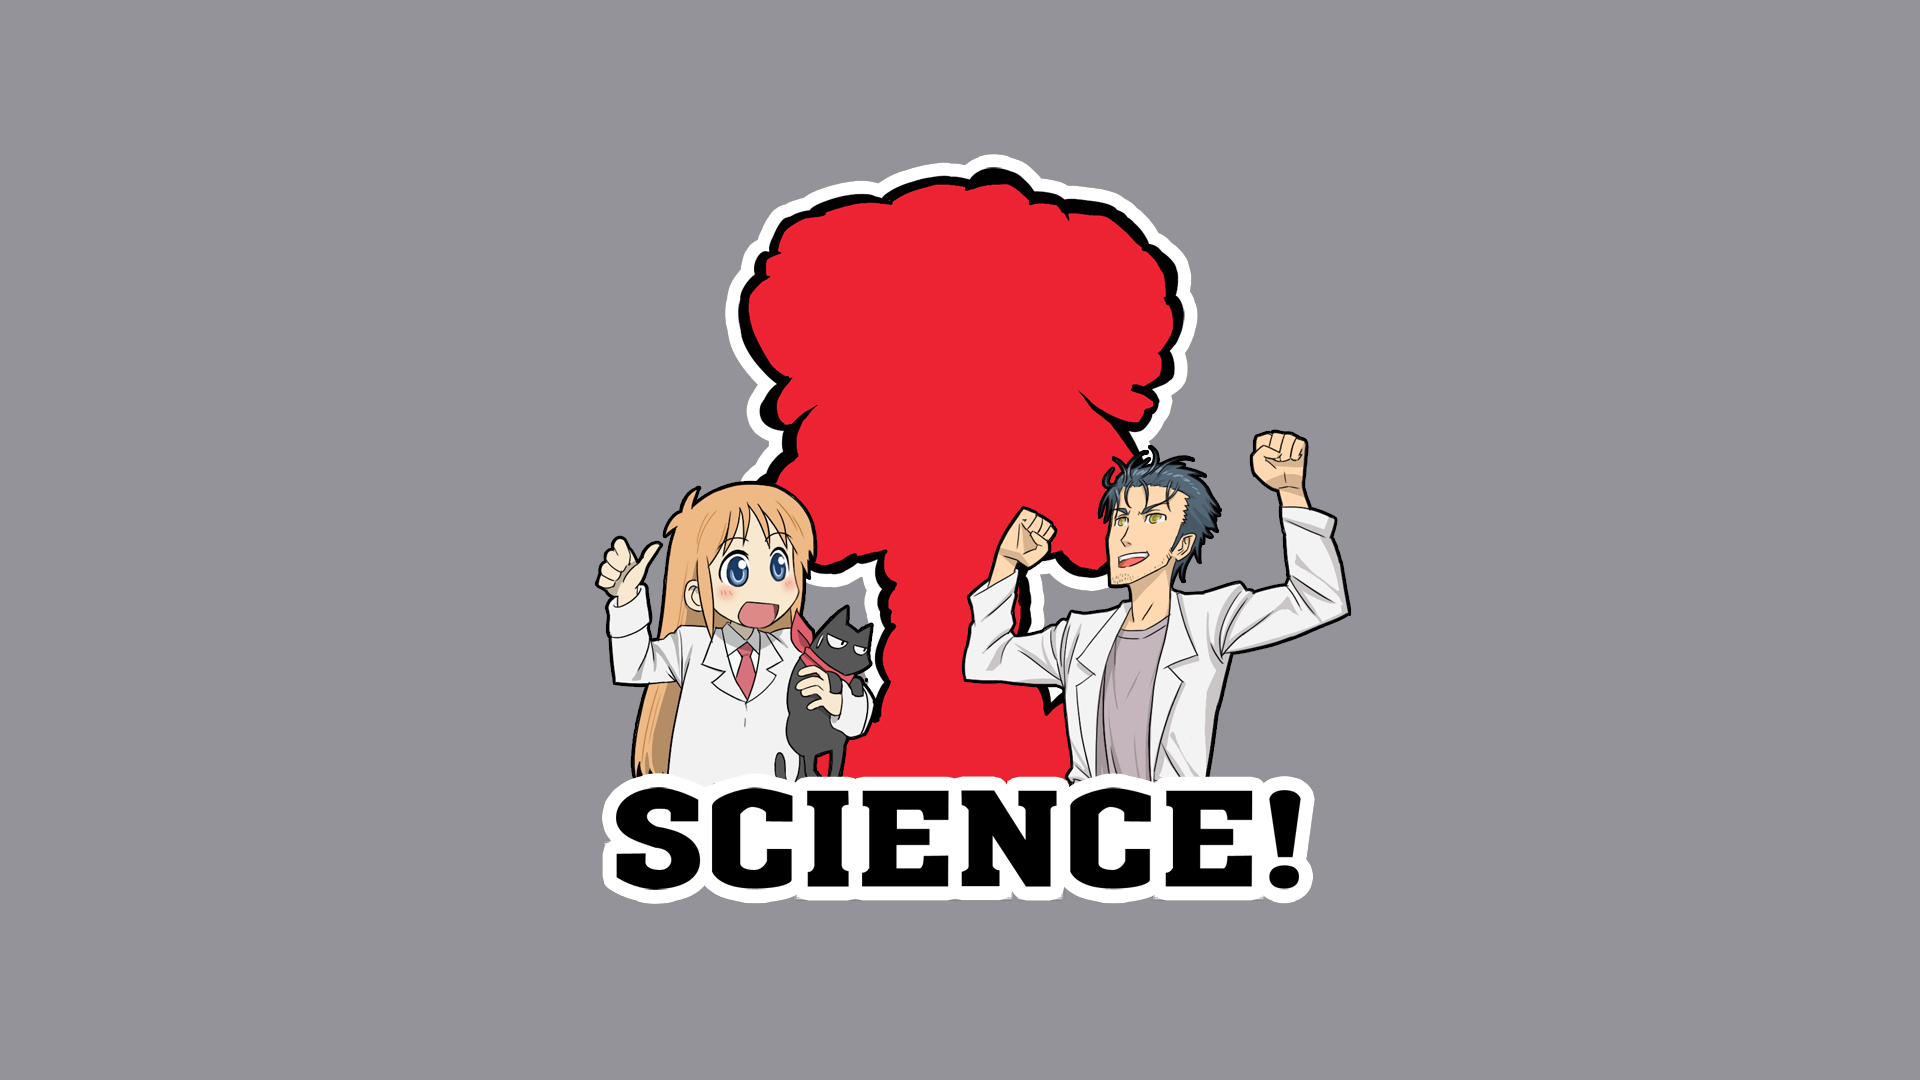 Anime crossover featuring characters from Nichijō and Steins;Gate in a science-themed wallpaper.